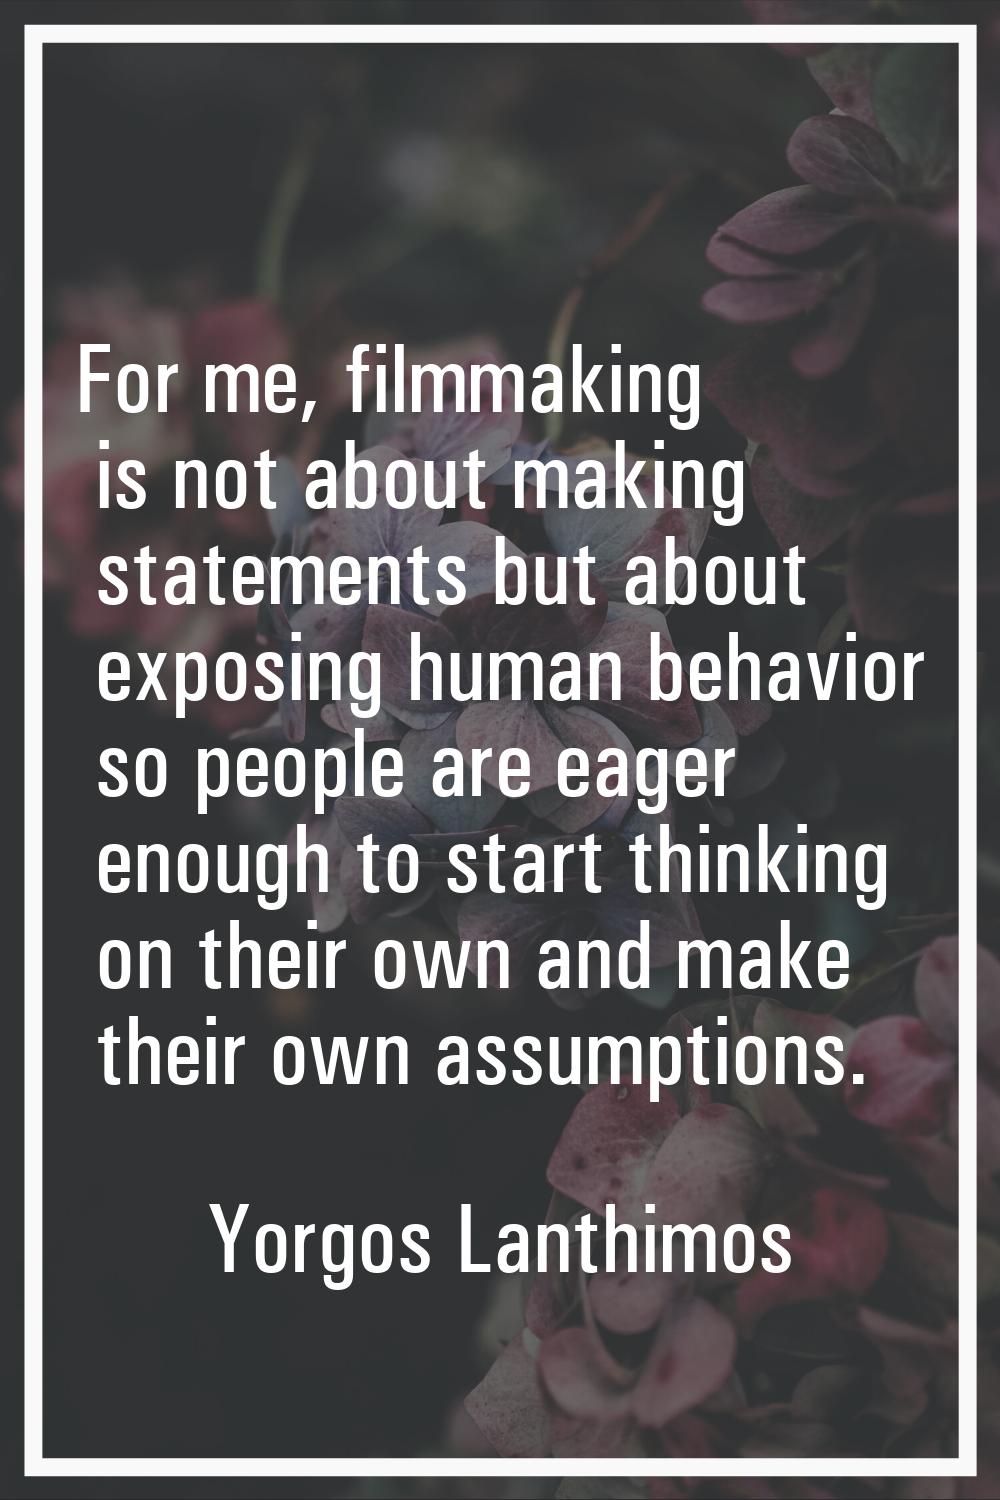 For me, filmmaking is not about making statements but about exposing human behavior so people are e